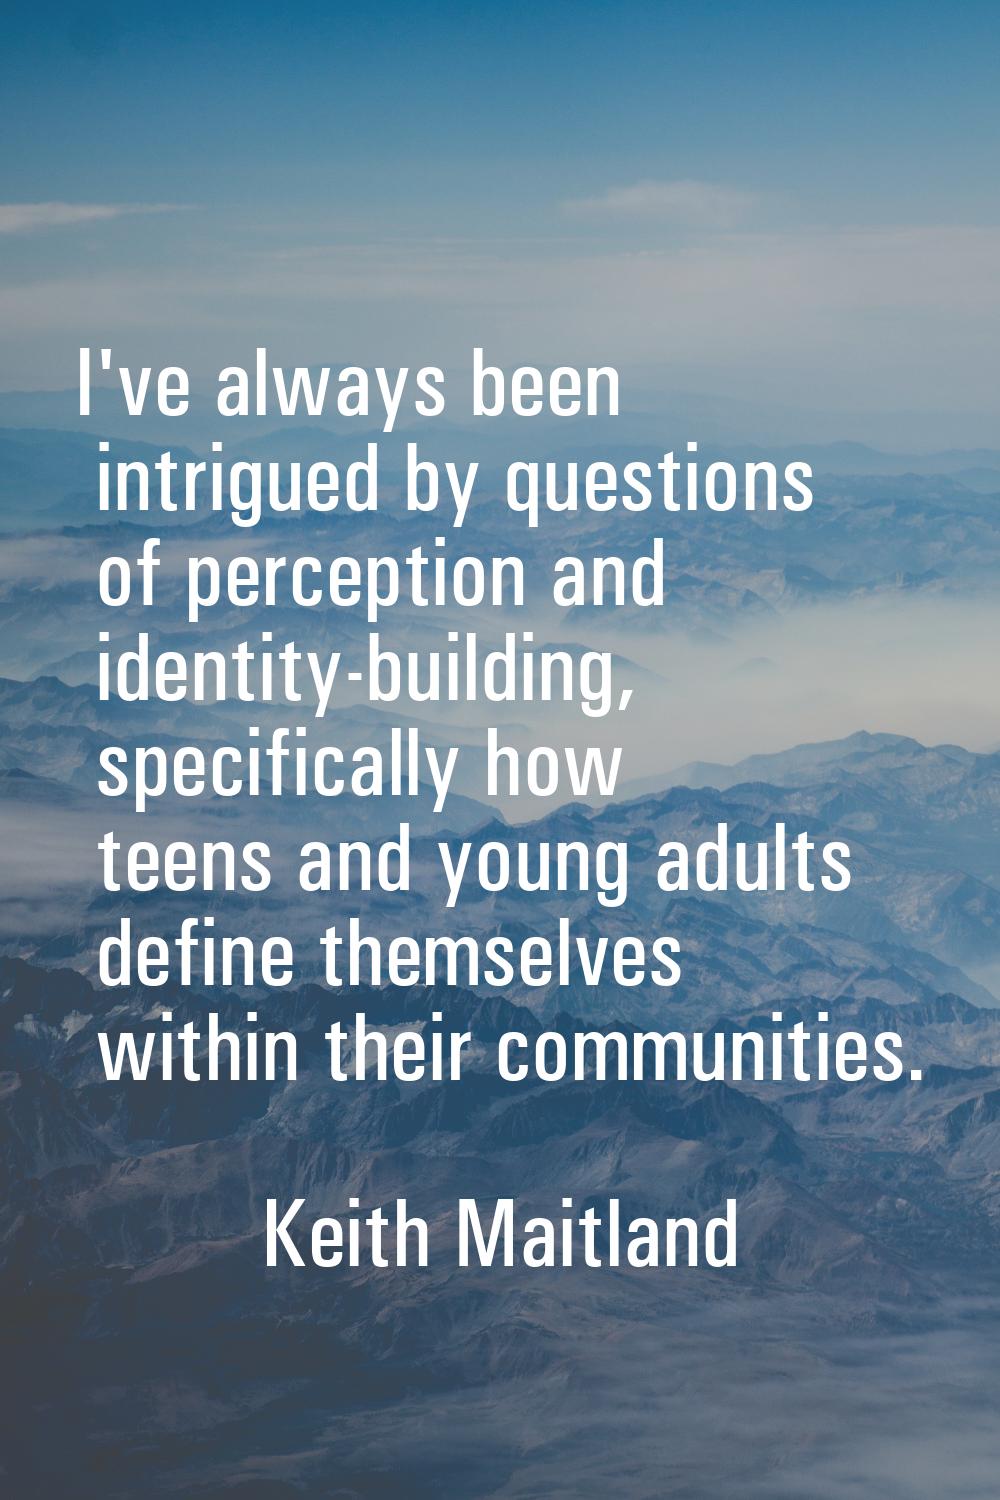 I've always been intrigued by questions of perception and identity-building, specifically how teens